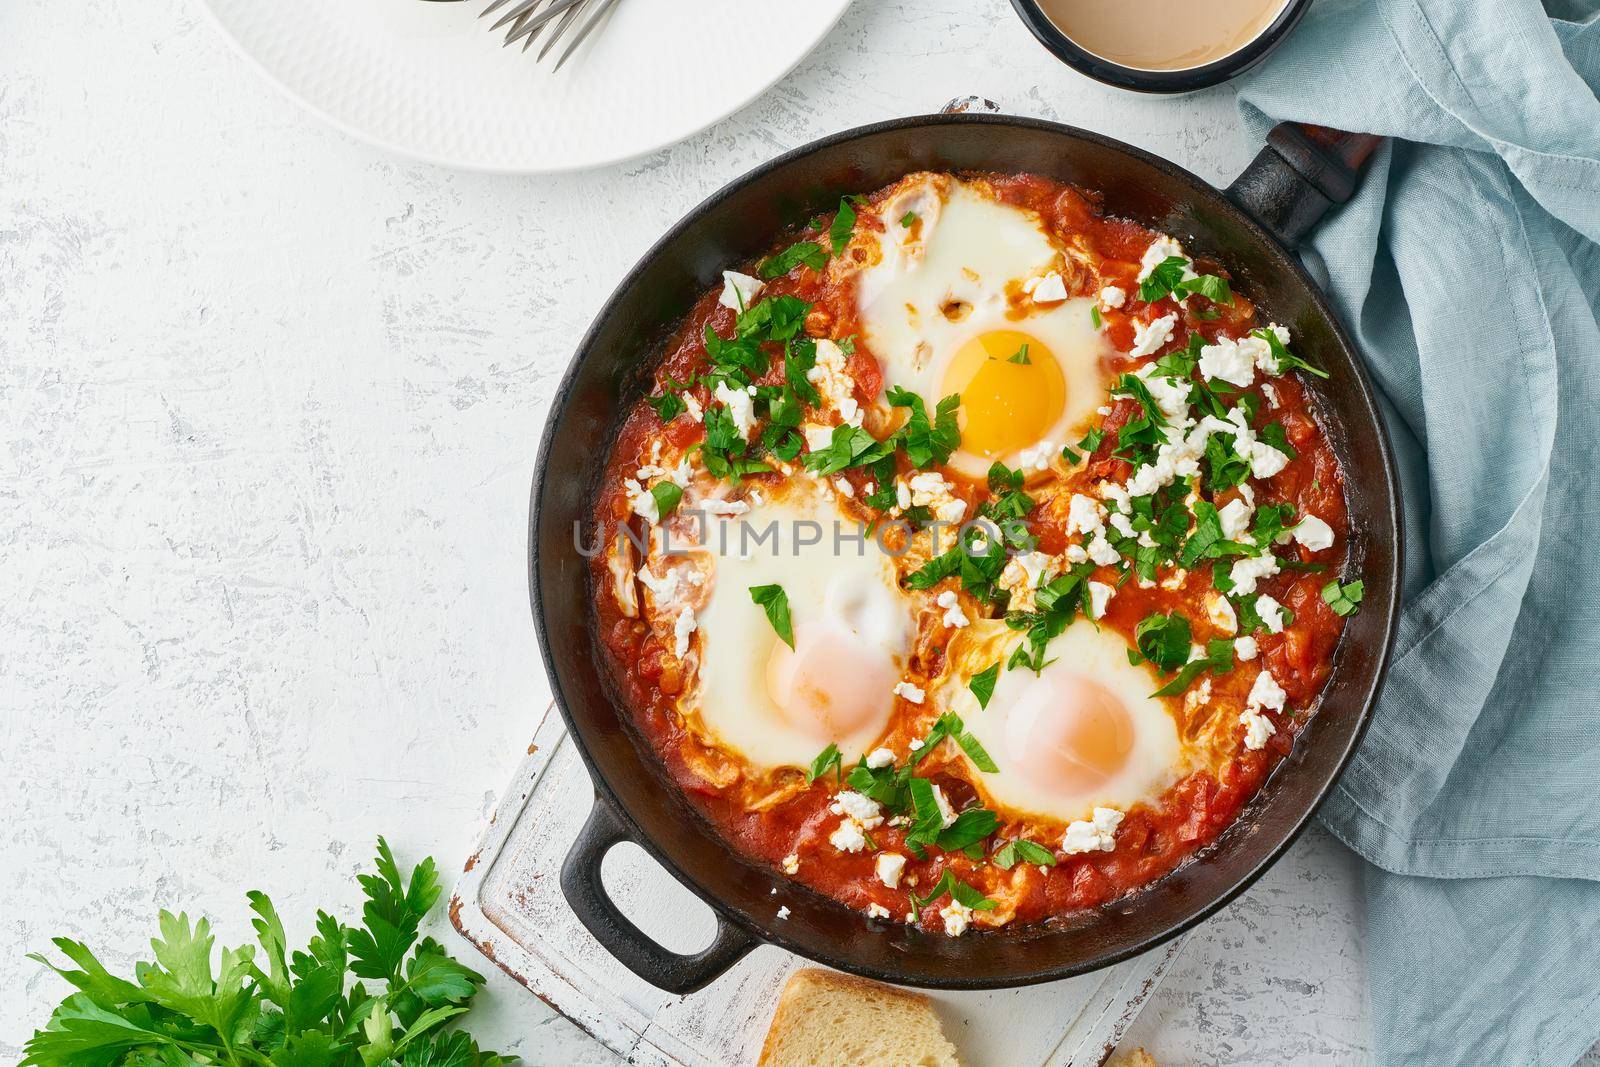 Shakshouka, eggs poached in sauce of tomatoes, olive oil, peppers, onion and garlic, Mediterranean cousine. Keto meal, FODMAP recipe, low carb. Top view, copy space